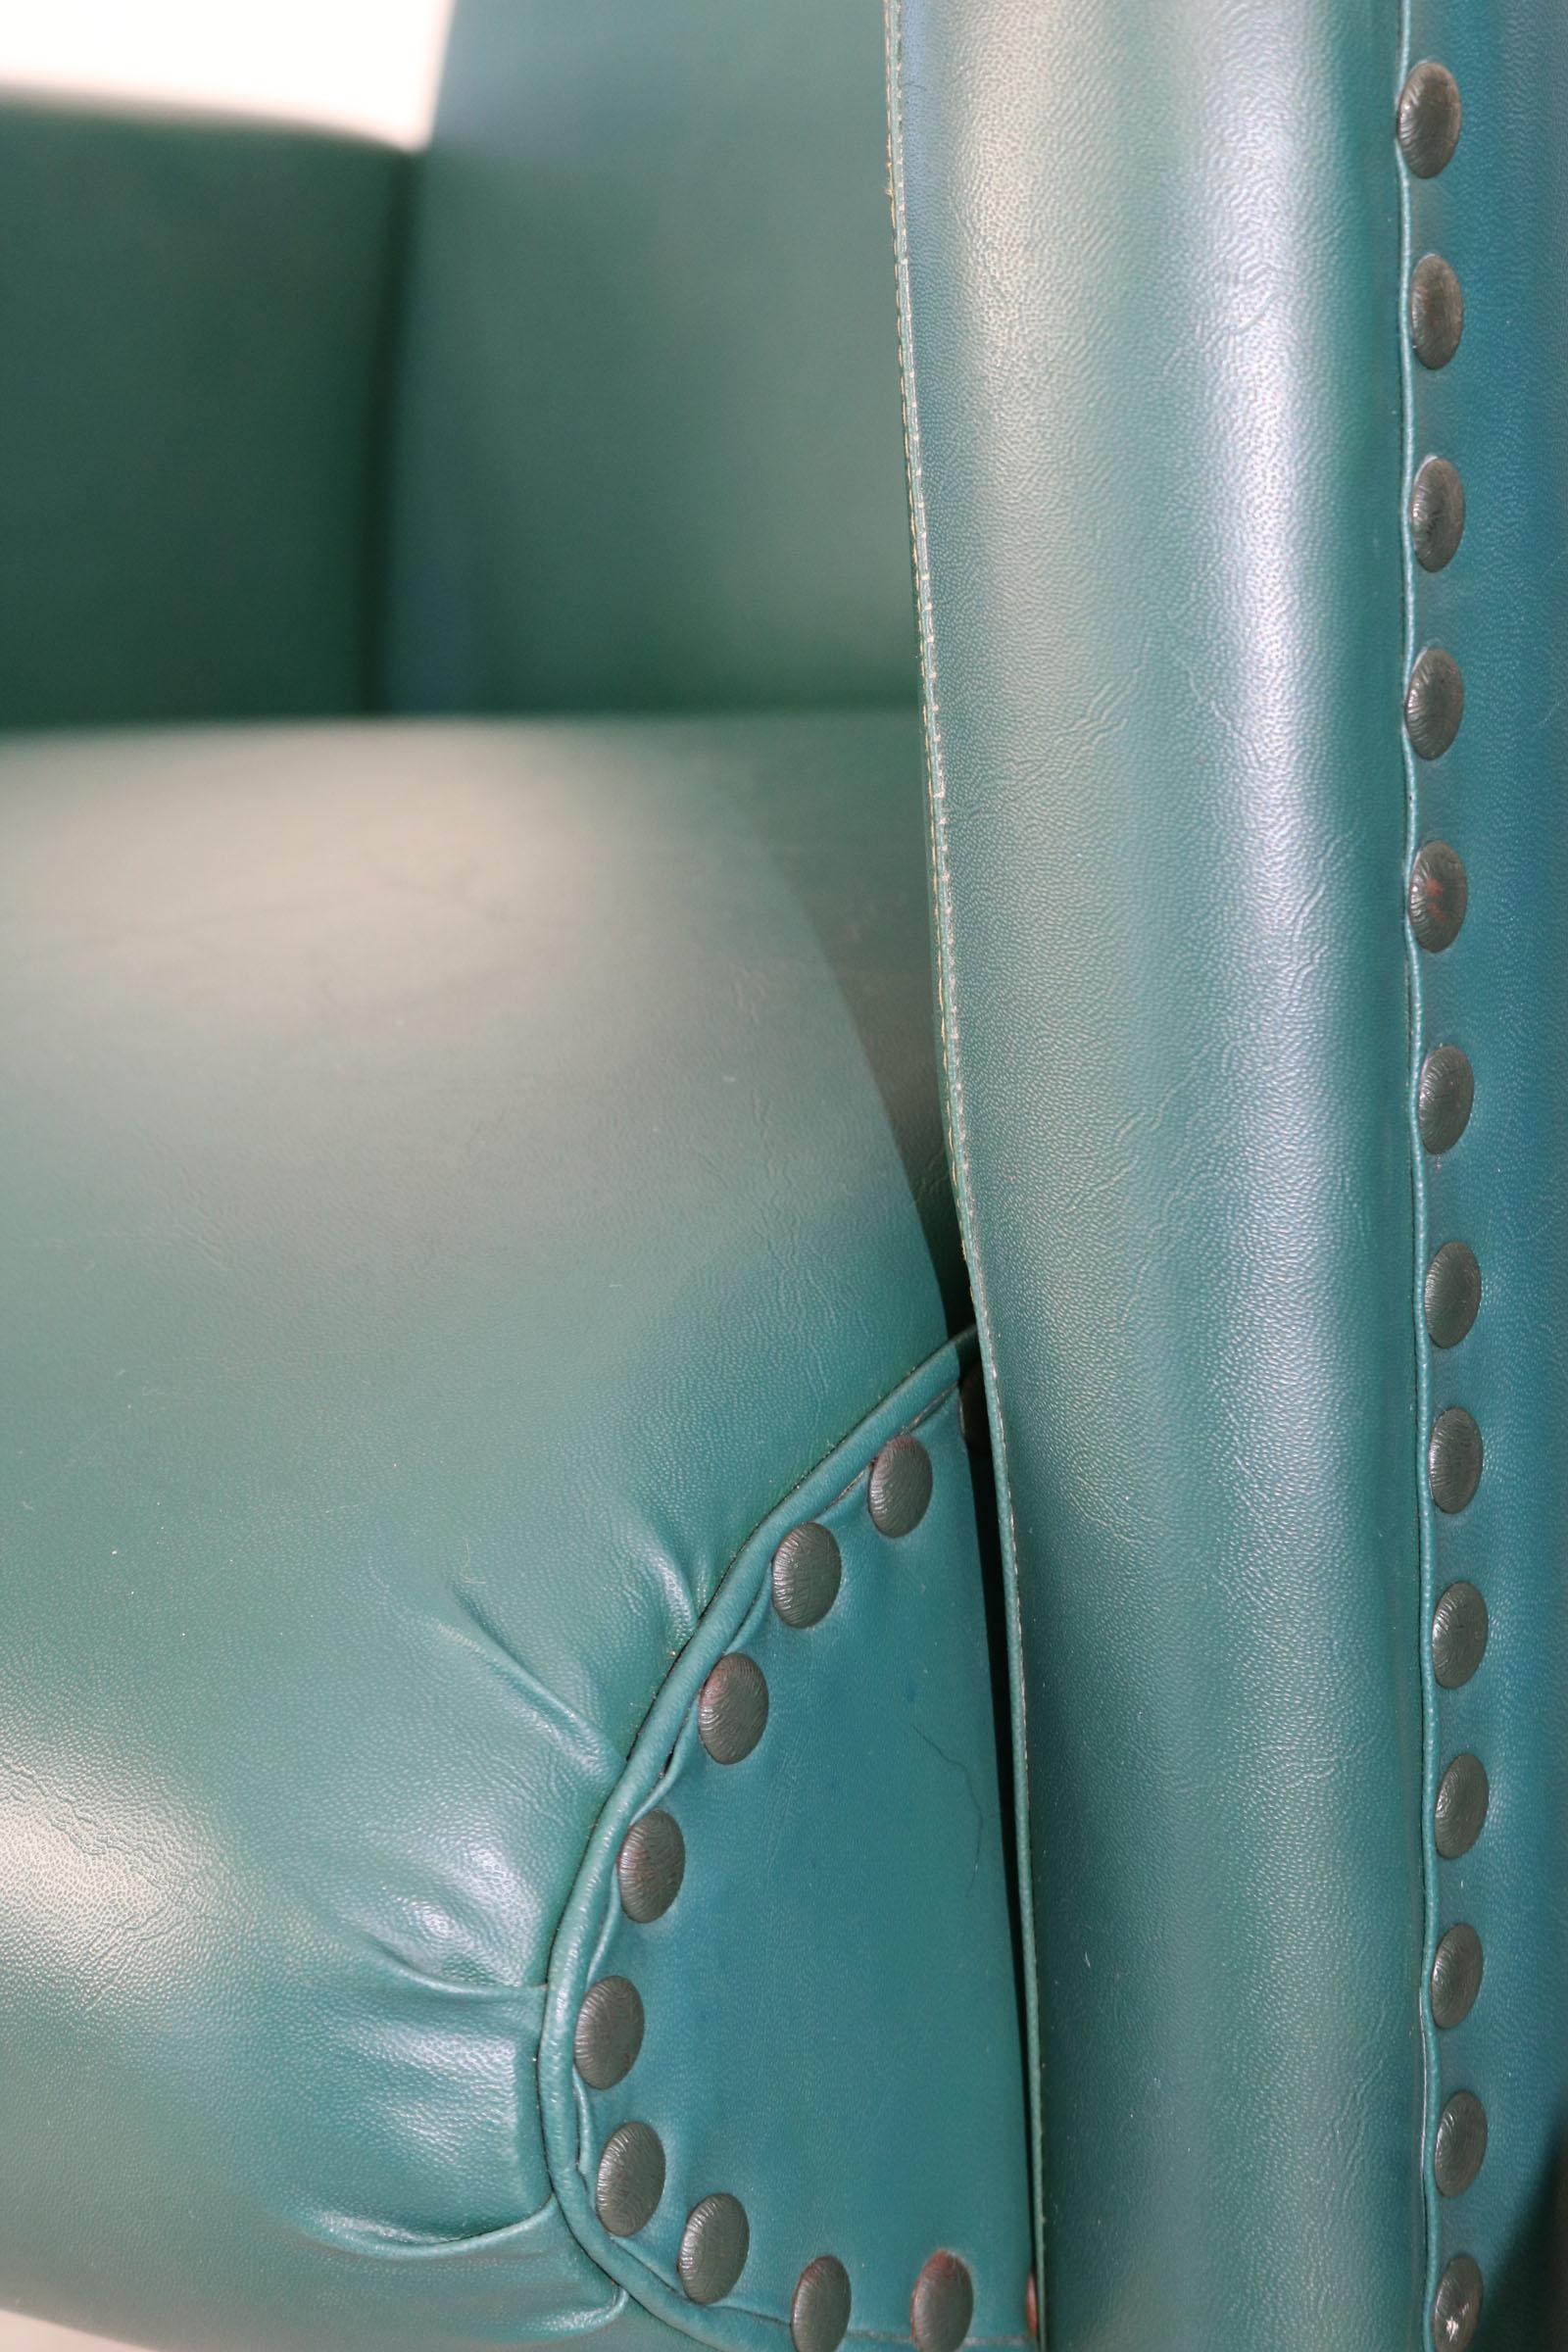 Pair of Italian Chairs in Original Green Imitation Leather Upholstery, 1950 For Sale 10